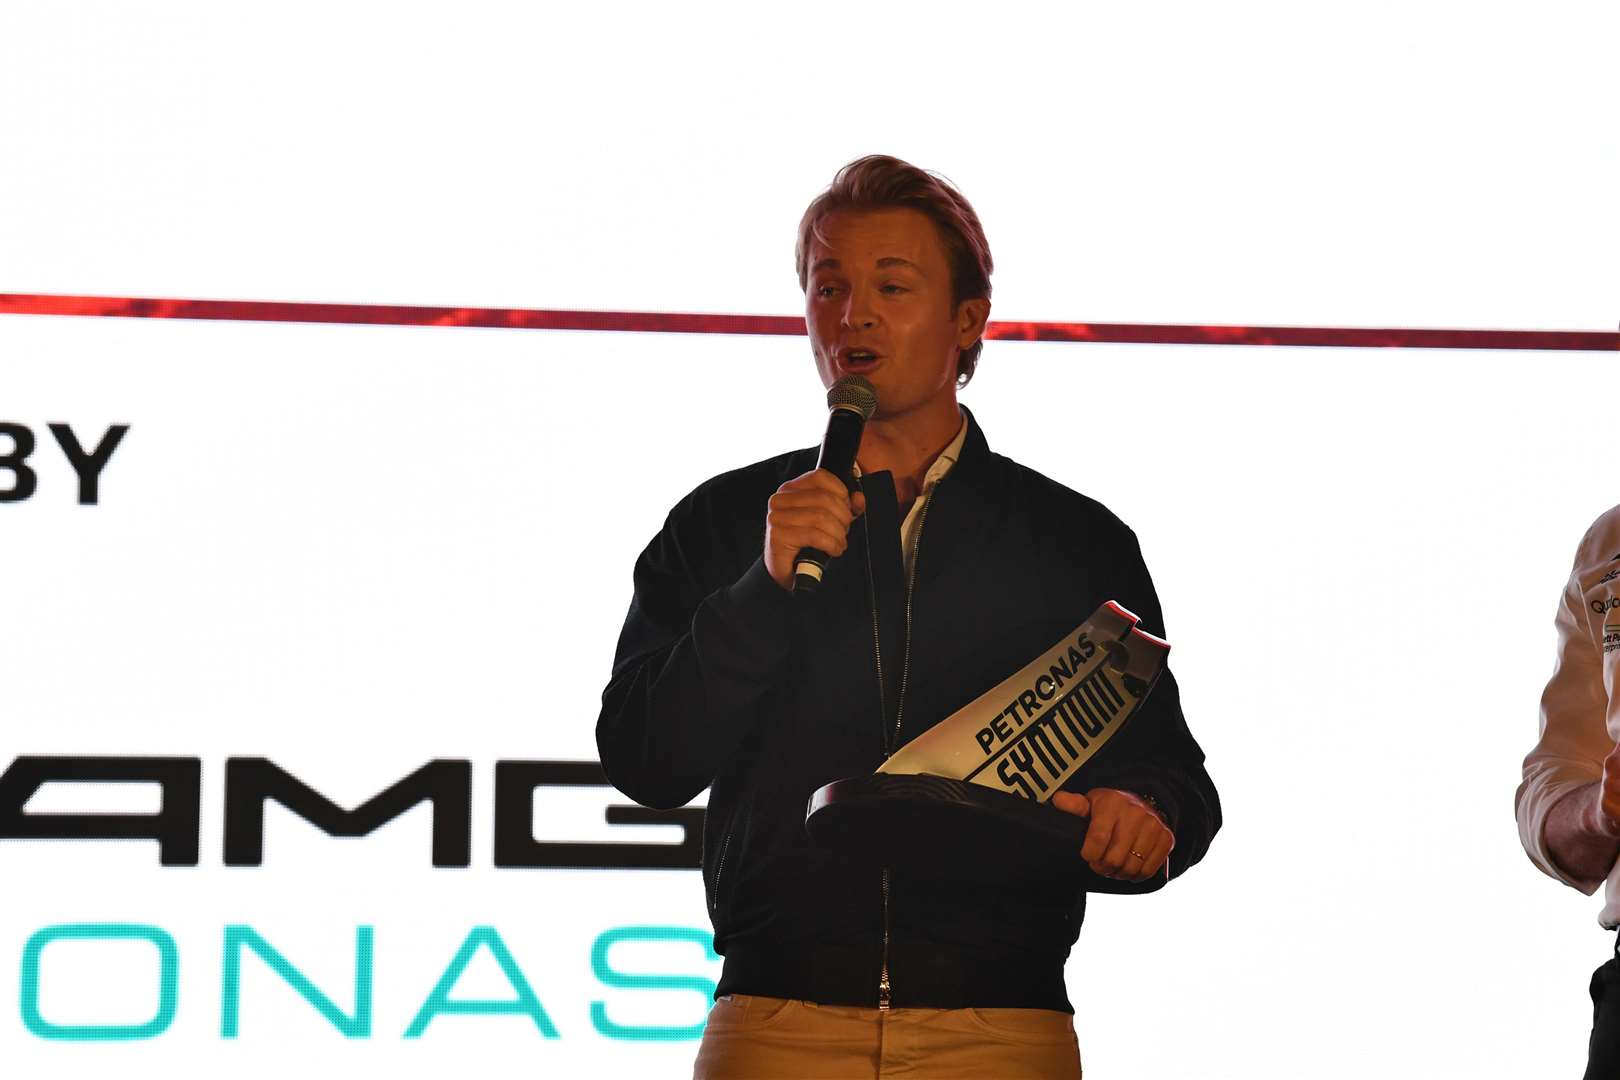 Racing driver Nico Rosberg on stage at the F1 in Schools finals